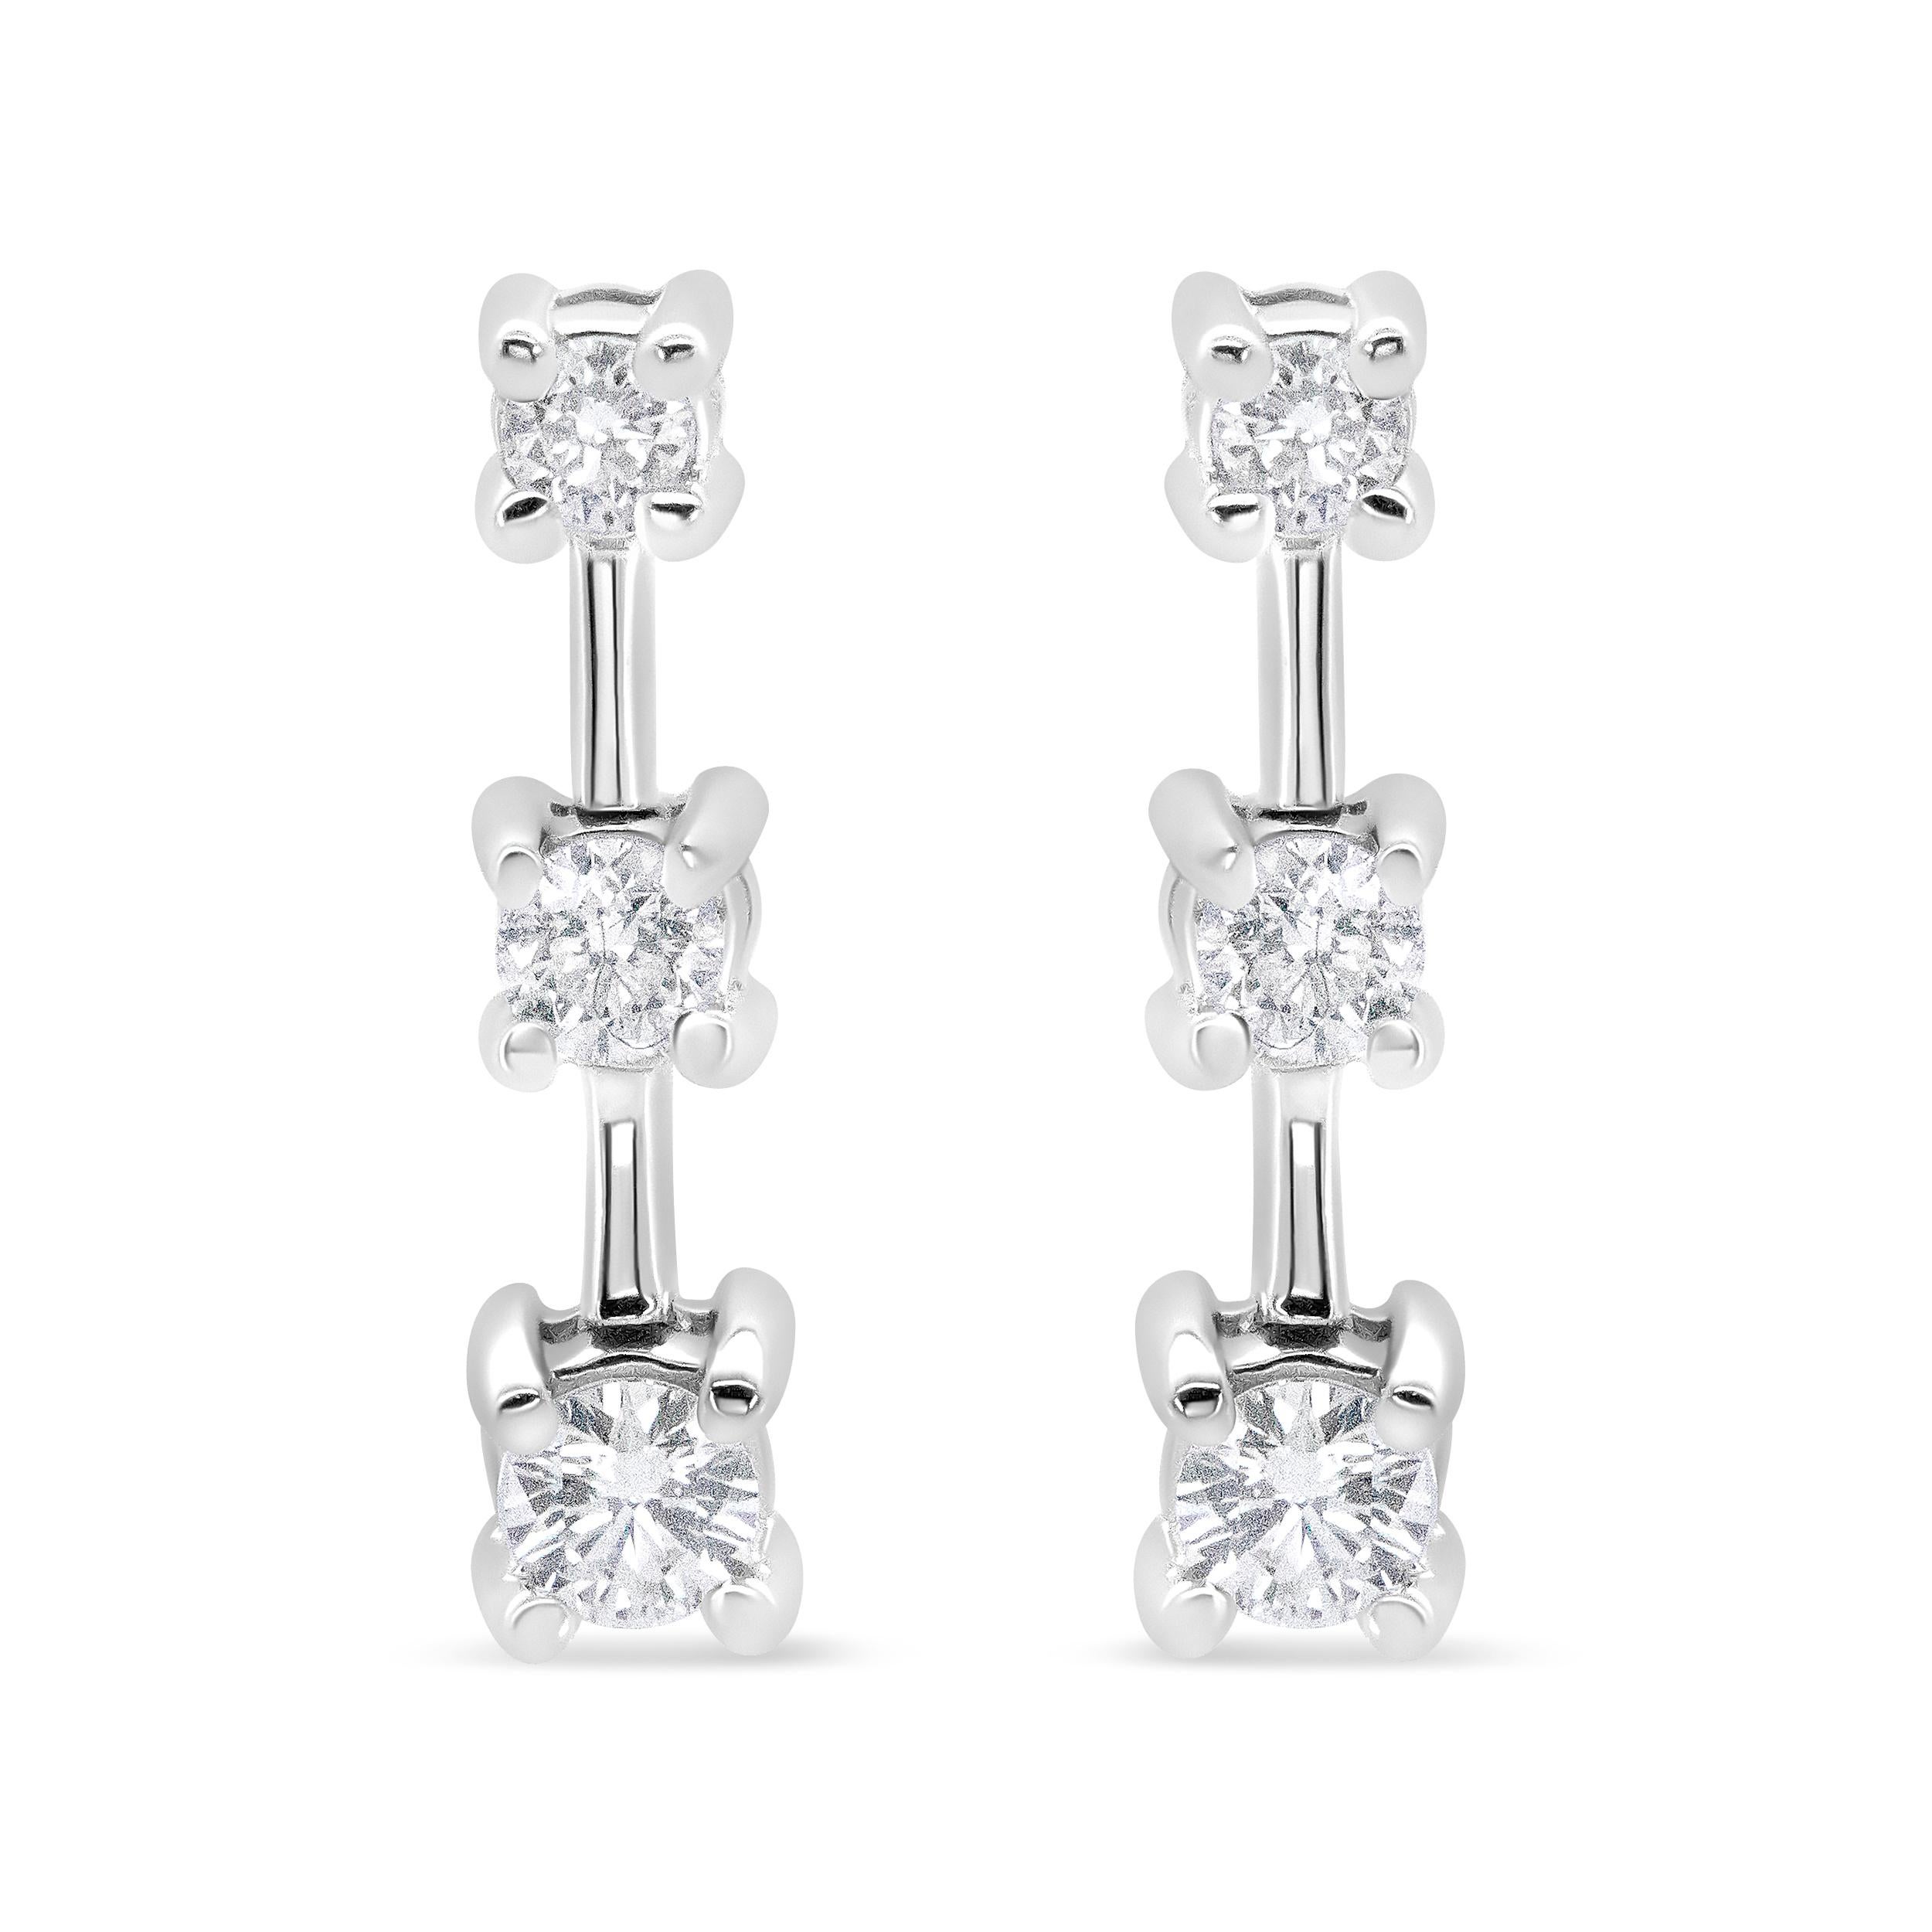 This fabulous three stone diamond earrings are set in a graduating design that align with the smallest stone at the top and the largest at the bottom in the ascending order of size. The three stone drop is a symbolism of one's past, present and